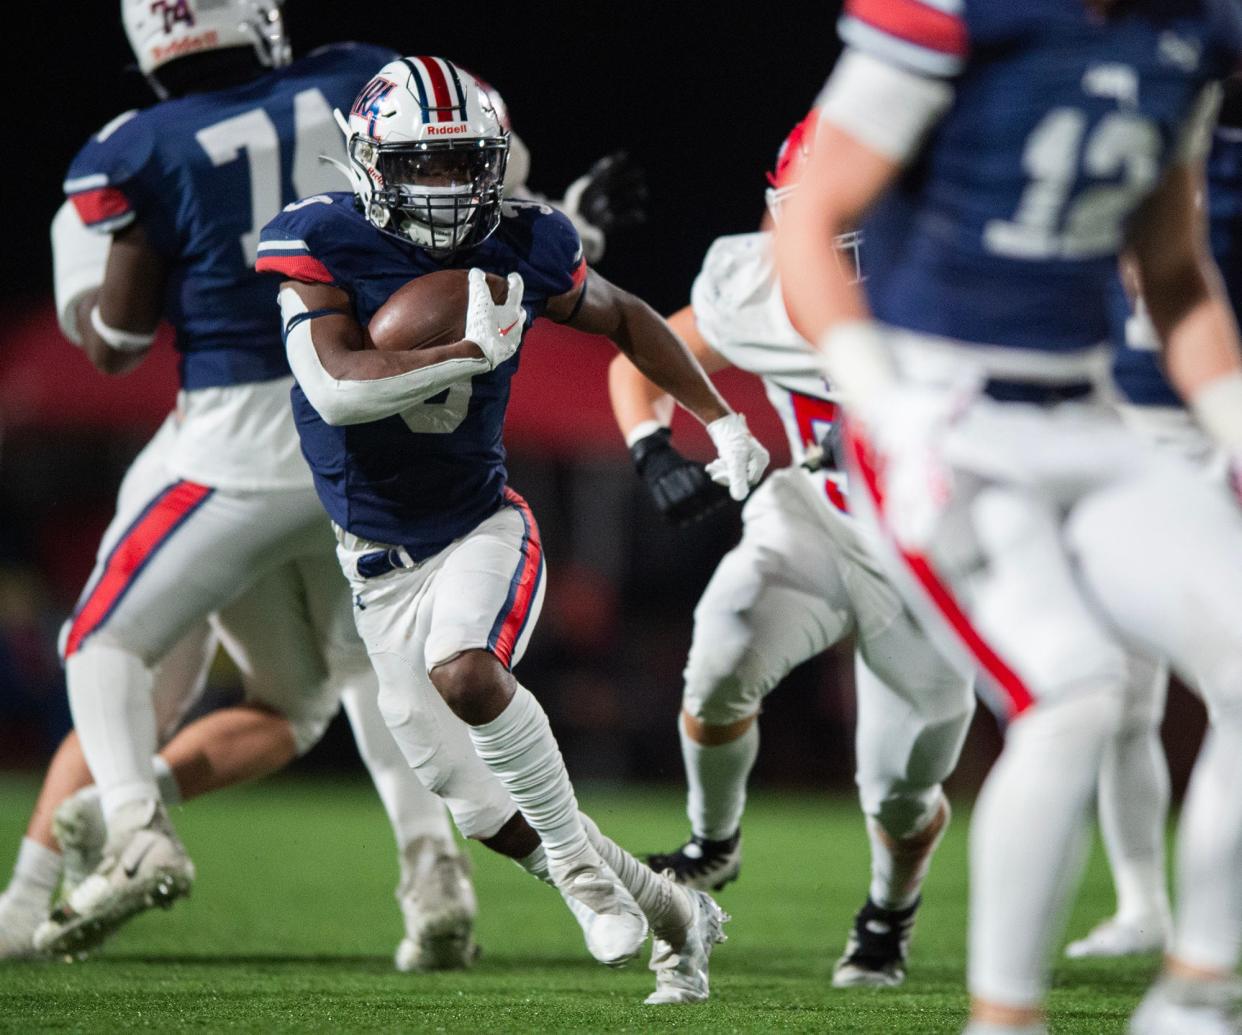 Madison-Ridgeland Academy's running back Charles Simpson (3) runs the ball during the game against the Jackson Prep Patriots at MRA's stadium in Madison, Miss., on Friday, Nov. 10, 2023.